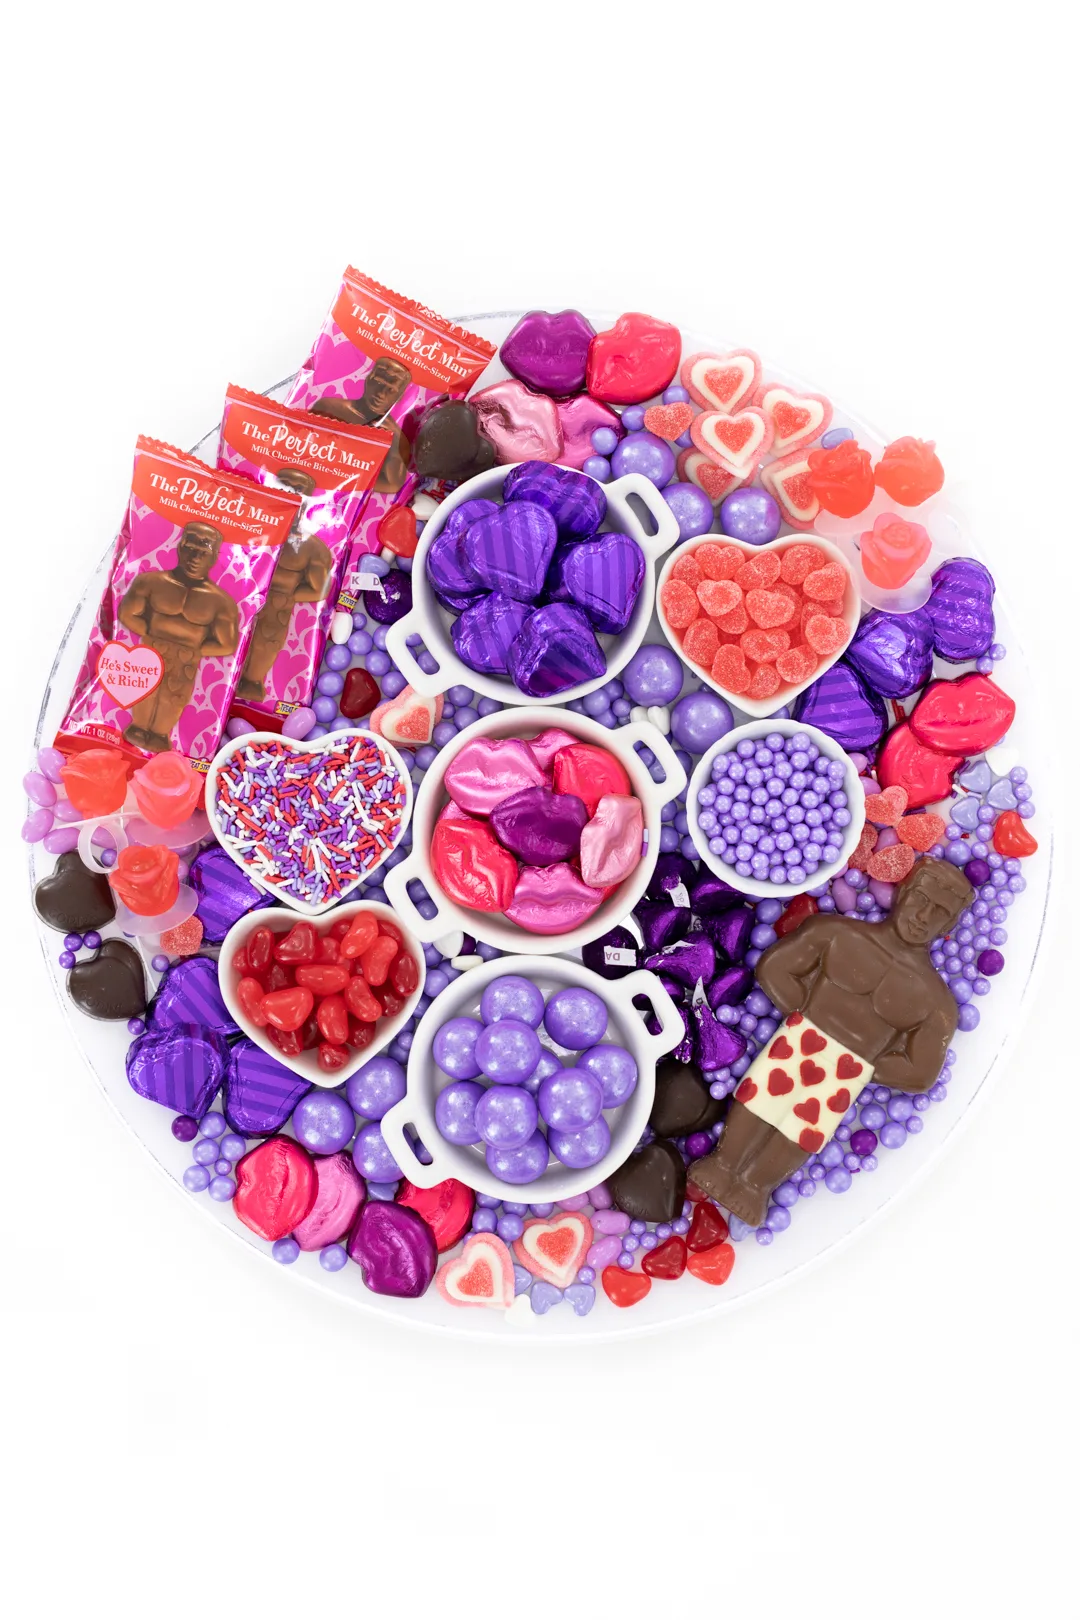 Pretty candy tray for galentine's day